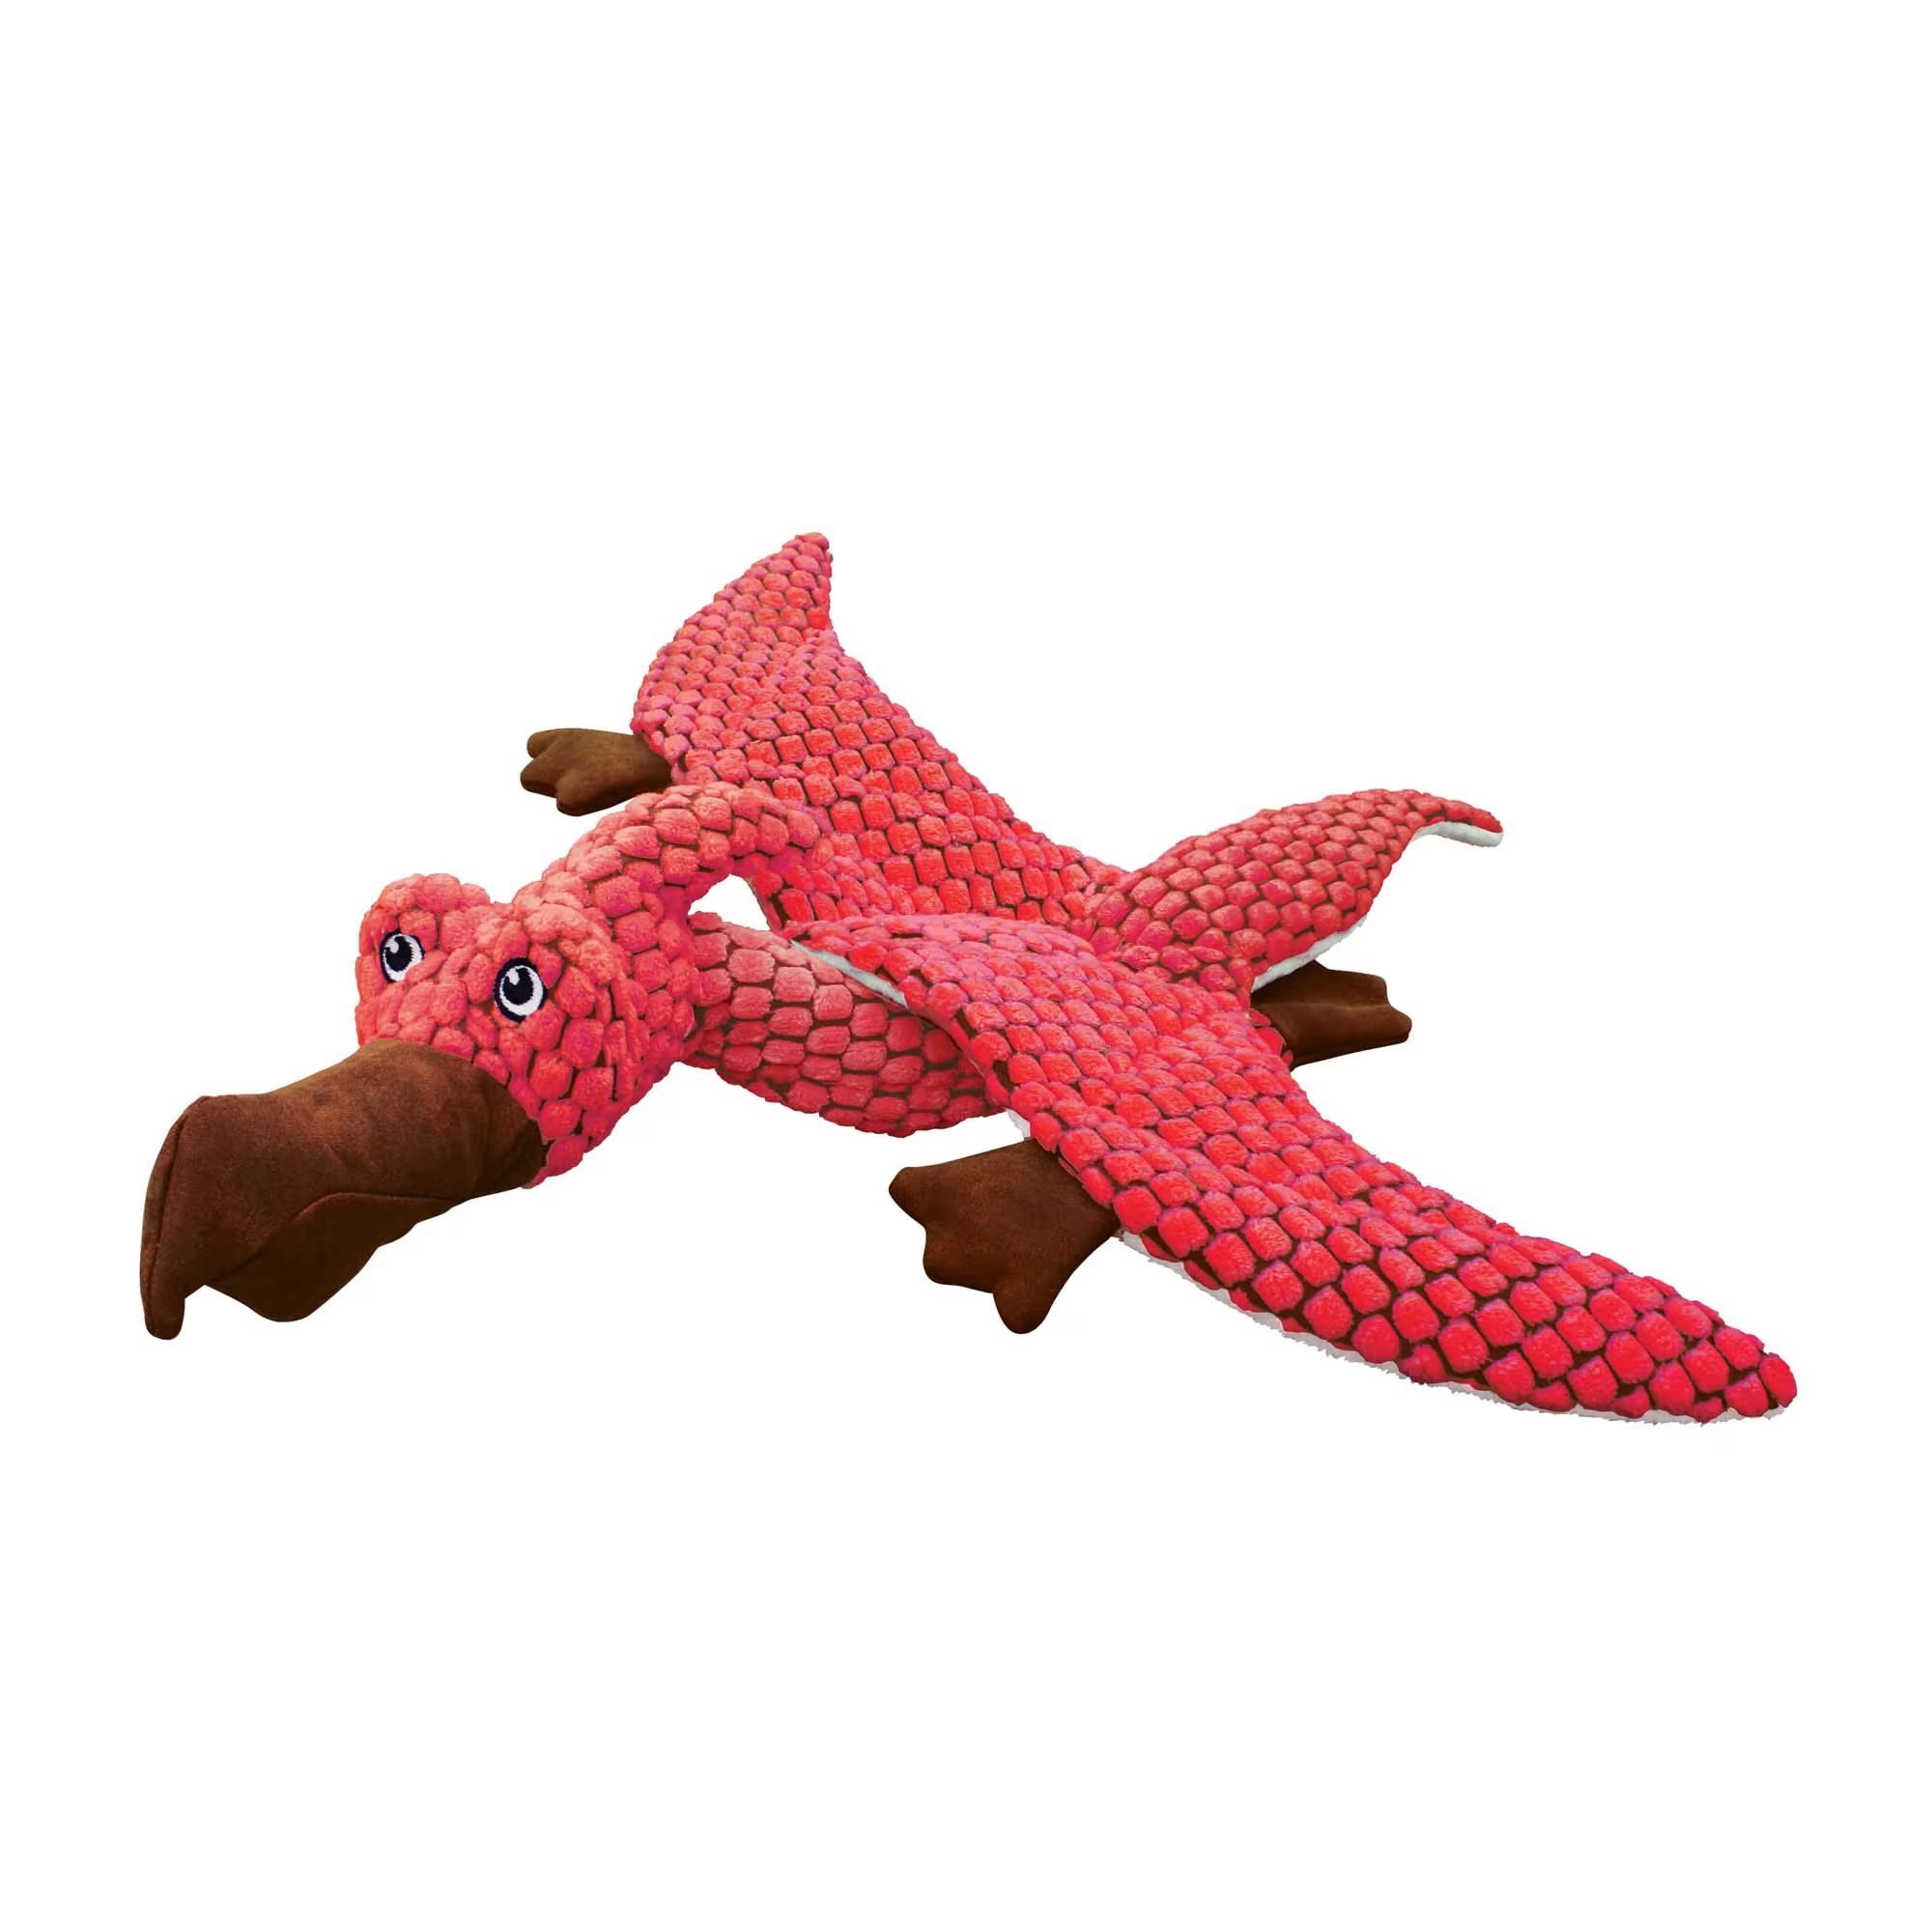 KONG Dynos Pterodactyl Coral Dog Toy, Large | Petco